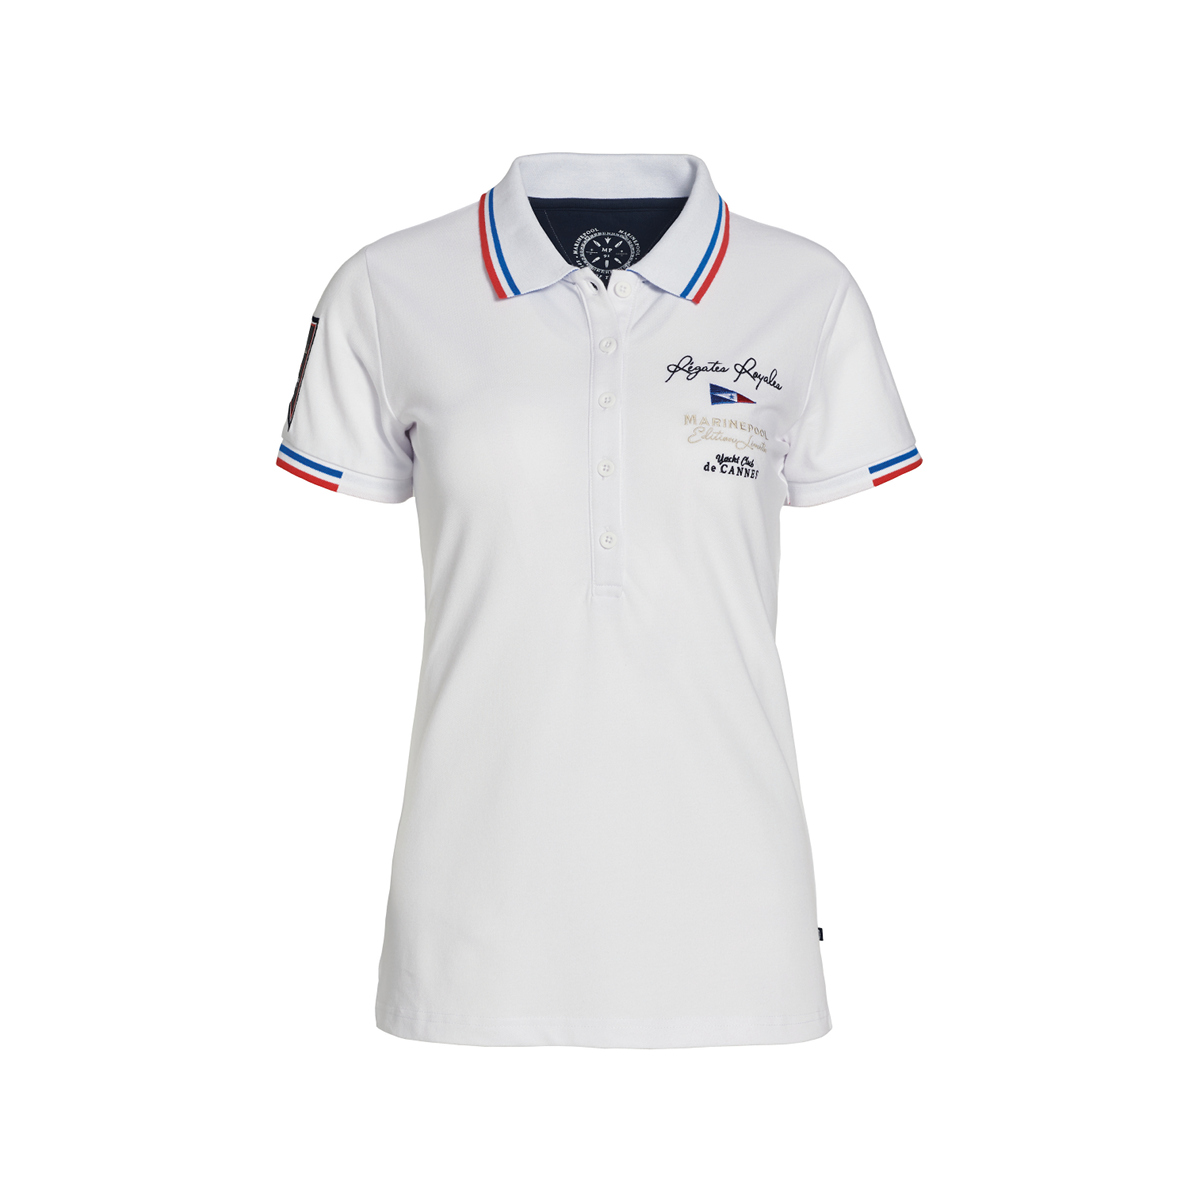 Marinepool Anabelle RR poloshirt dames wit, maat M